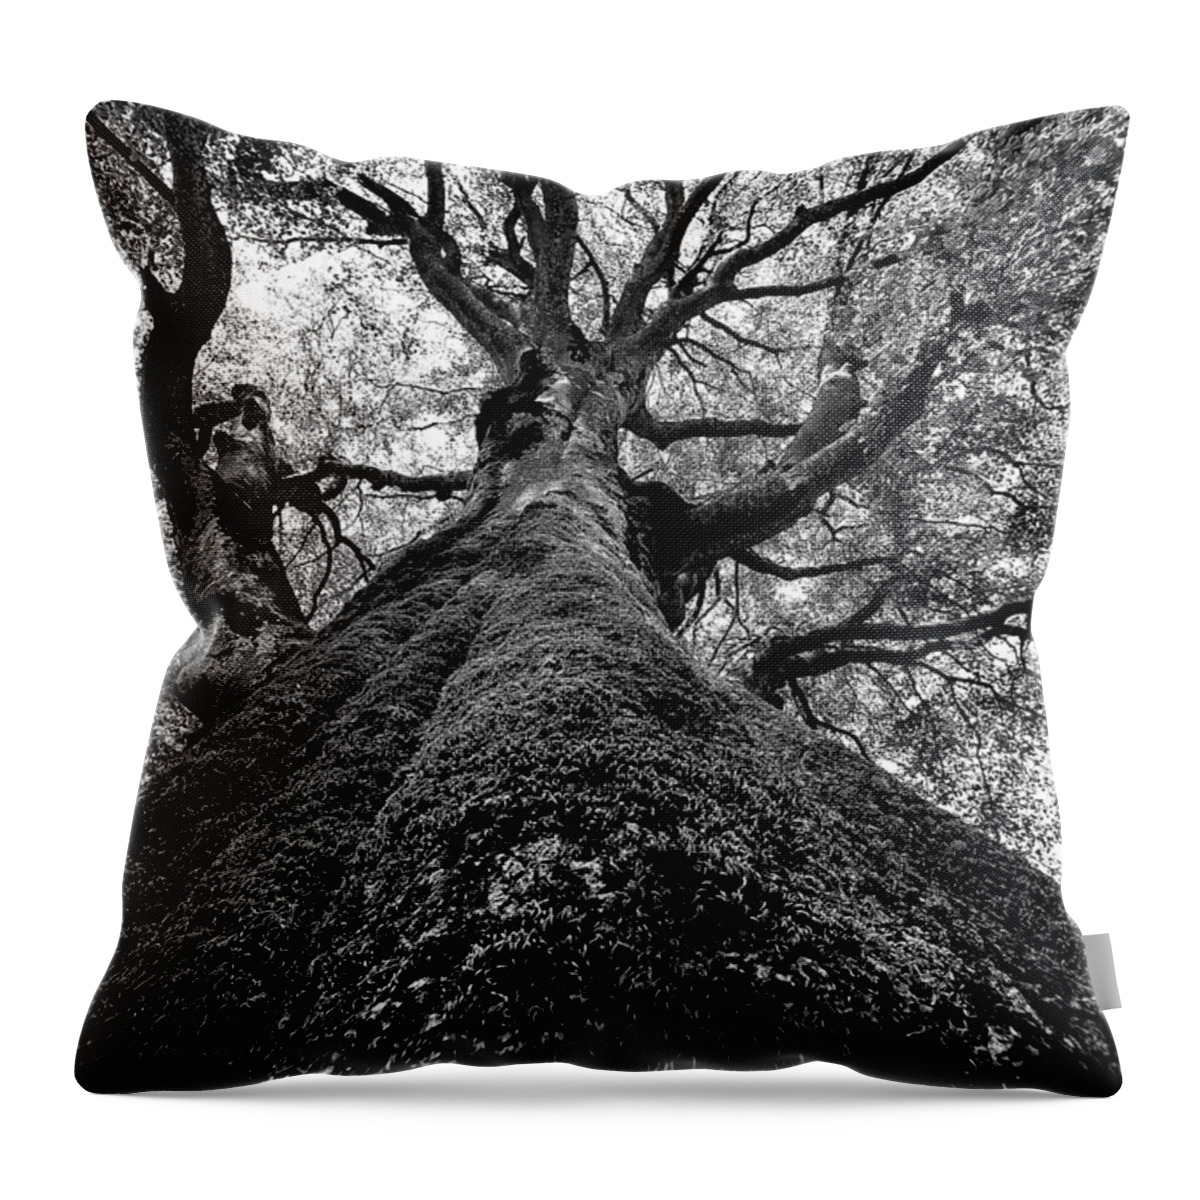 Tree Throw Pillow featuring the photograph Tree by Effezetaphoto Fz